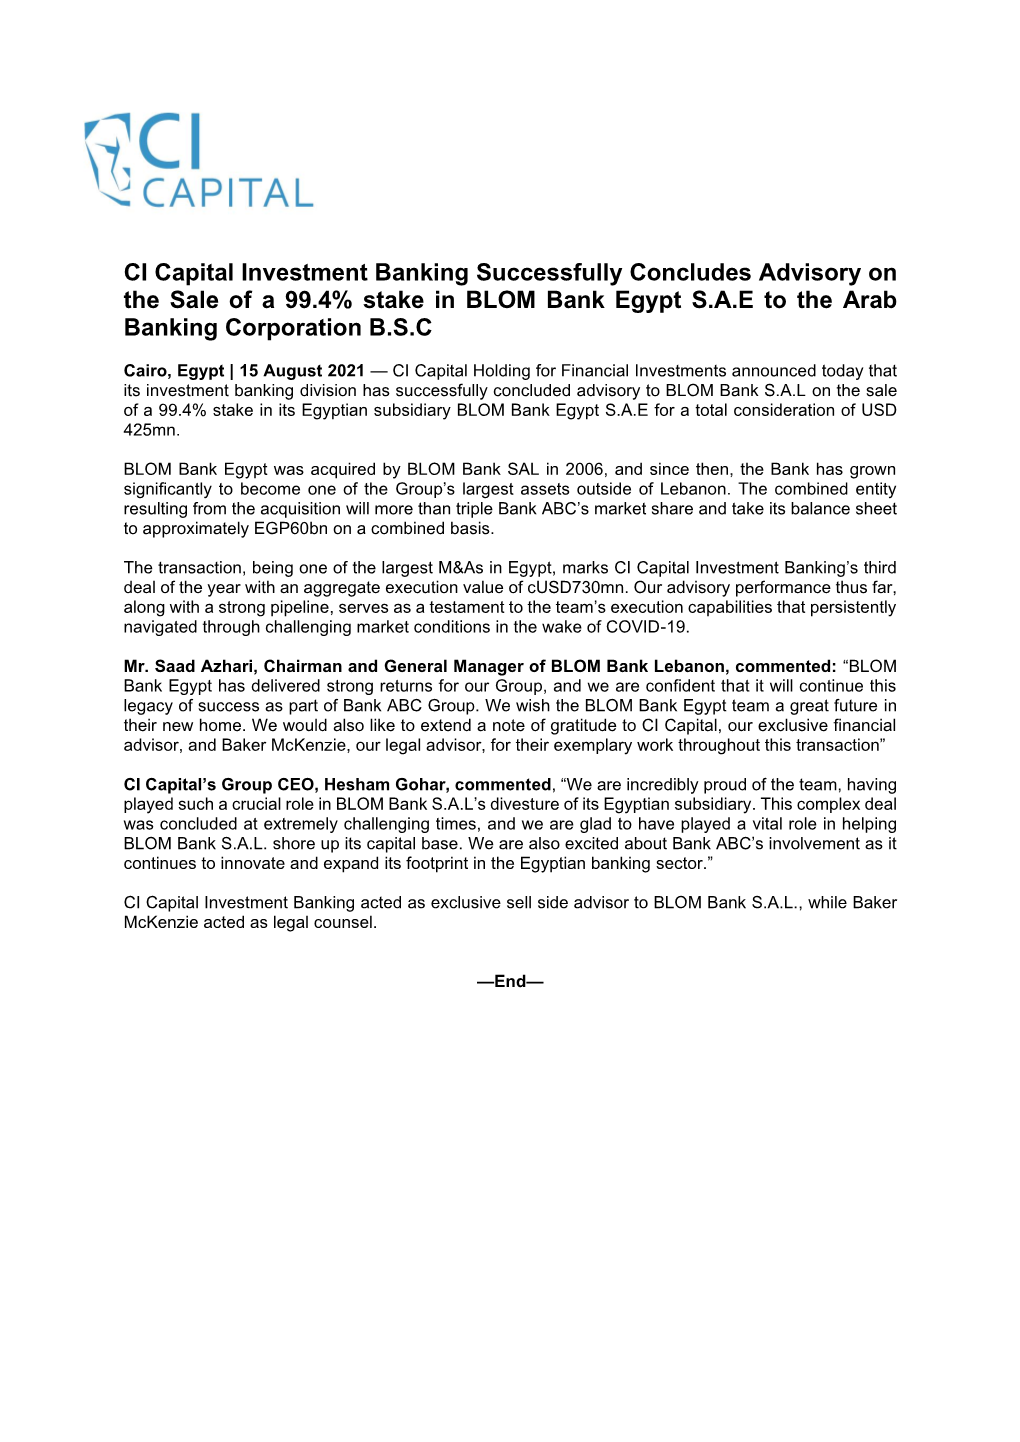 CI Capital Investment Banking Successfully Concludes Advisory on the Sale of a 99.4% Stake in BLOM Bank Egypt S.A.E to the Arab Banking Corporation B.S.C